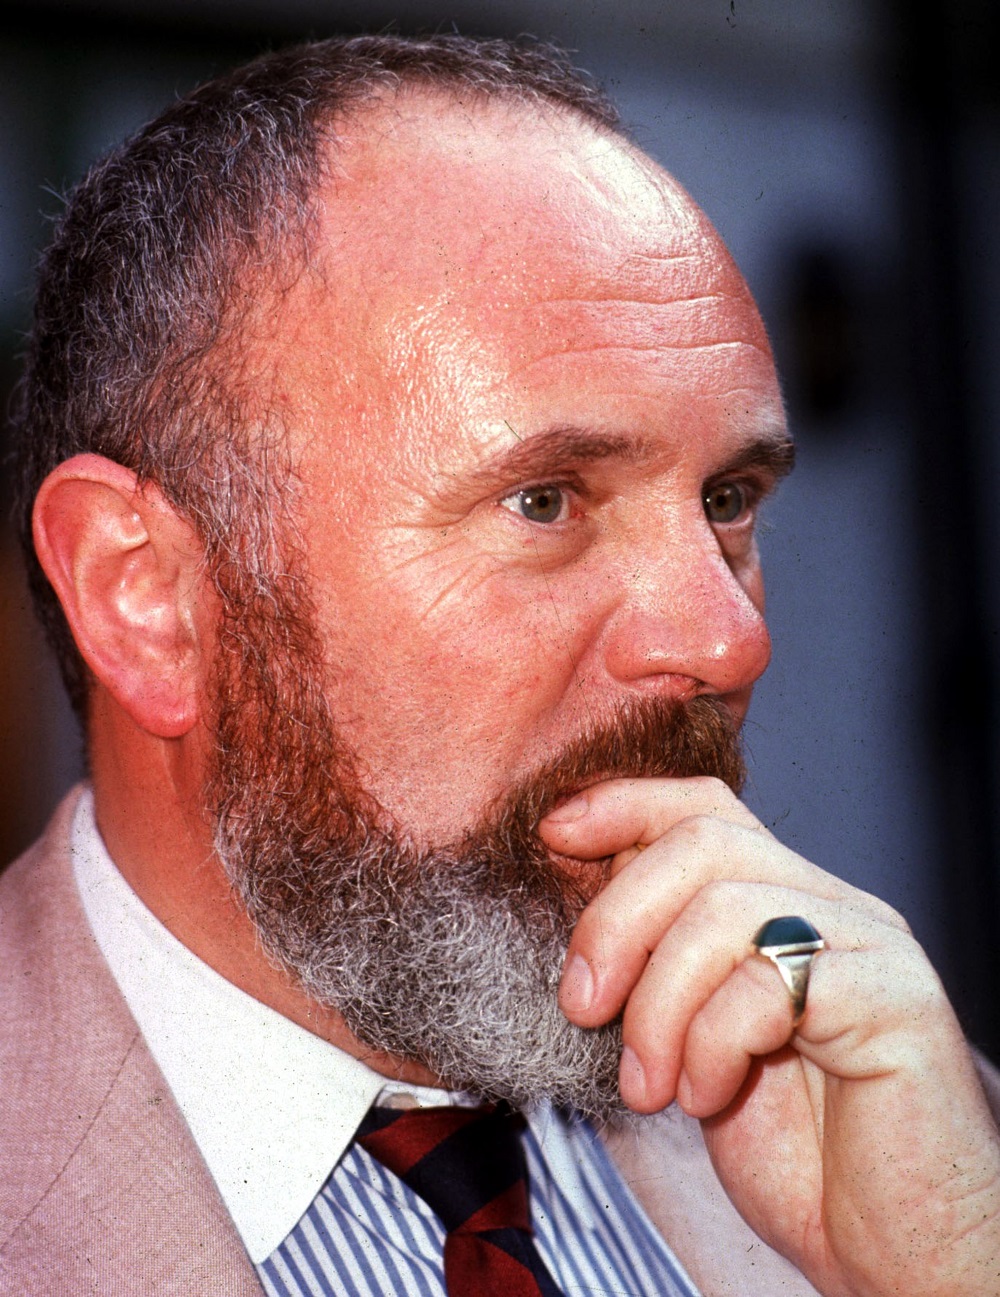 David Norris was first elected to the 18th Seanad in 1987